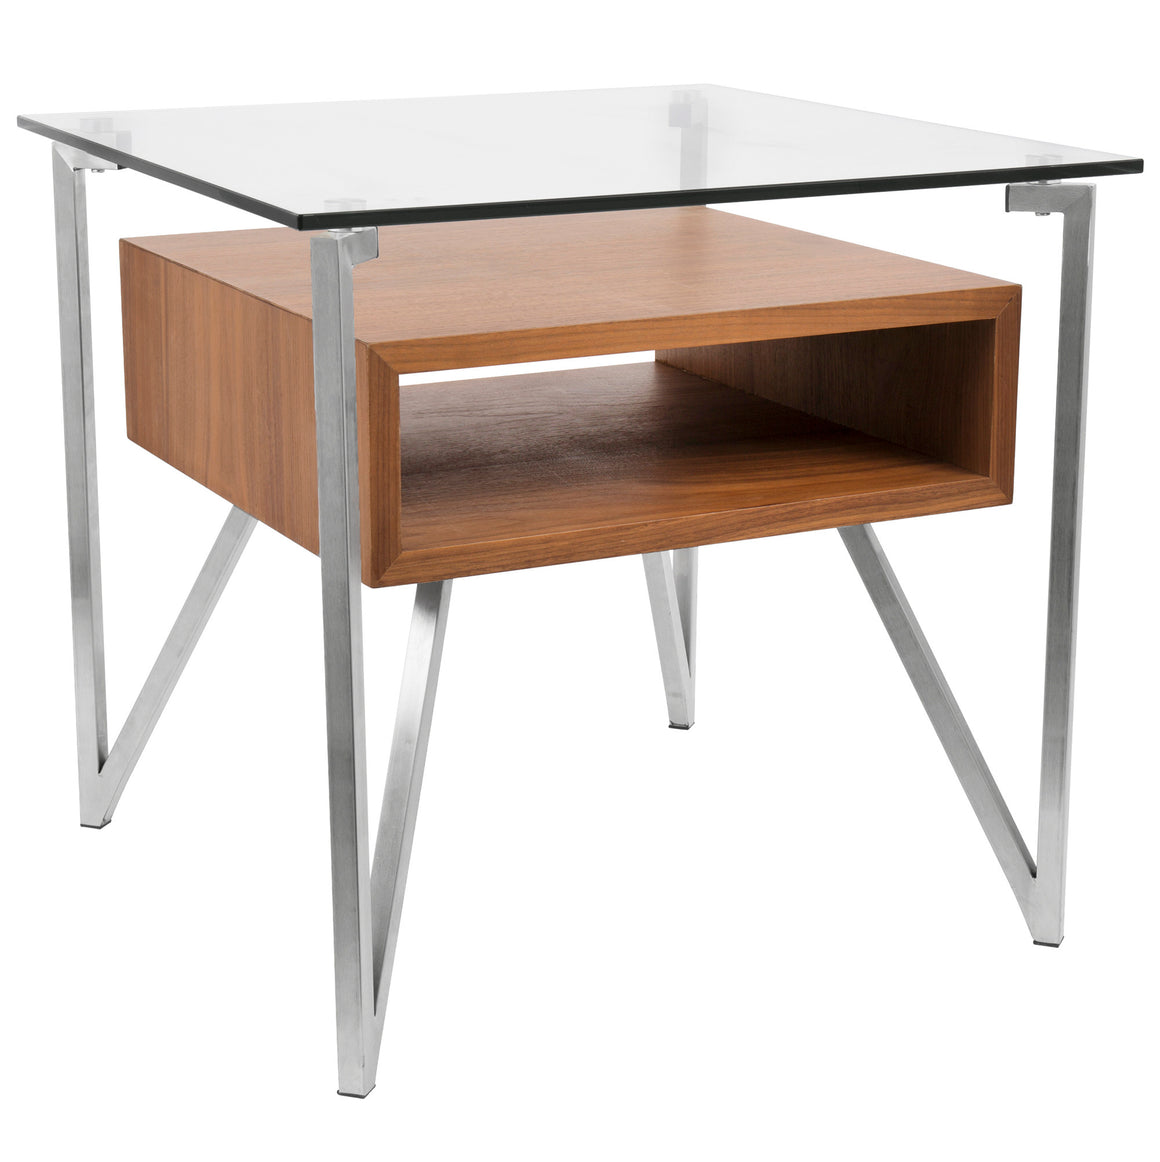 Hover Contemporary End Table with Brushed Stainless Steel Frame, Walnut Wood Shelf, and Clear Glass Top by LumiSource